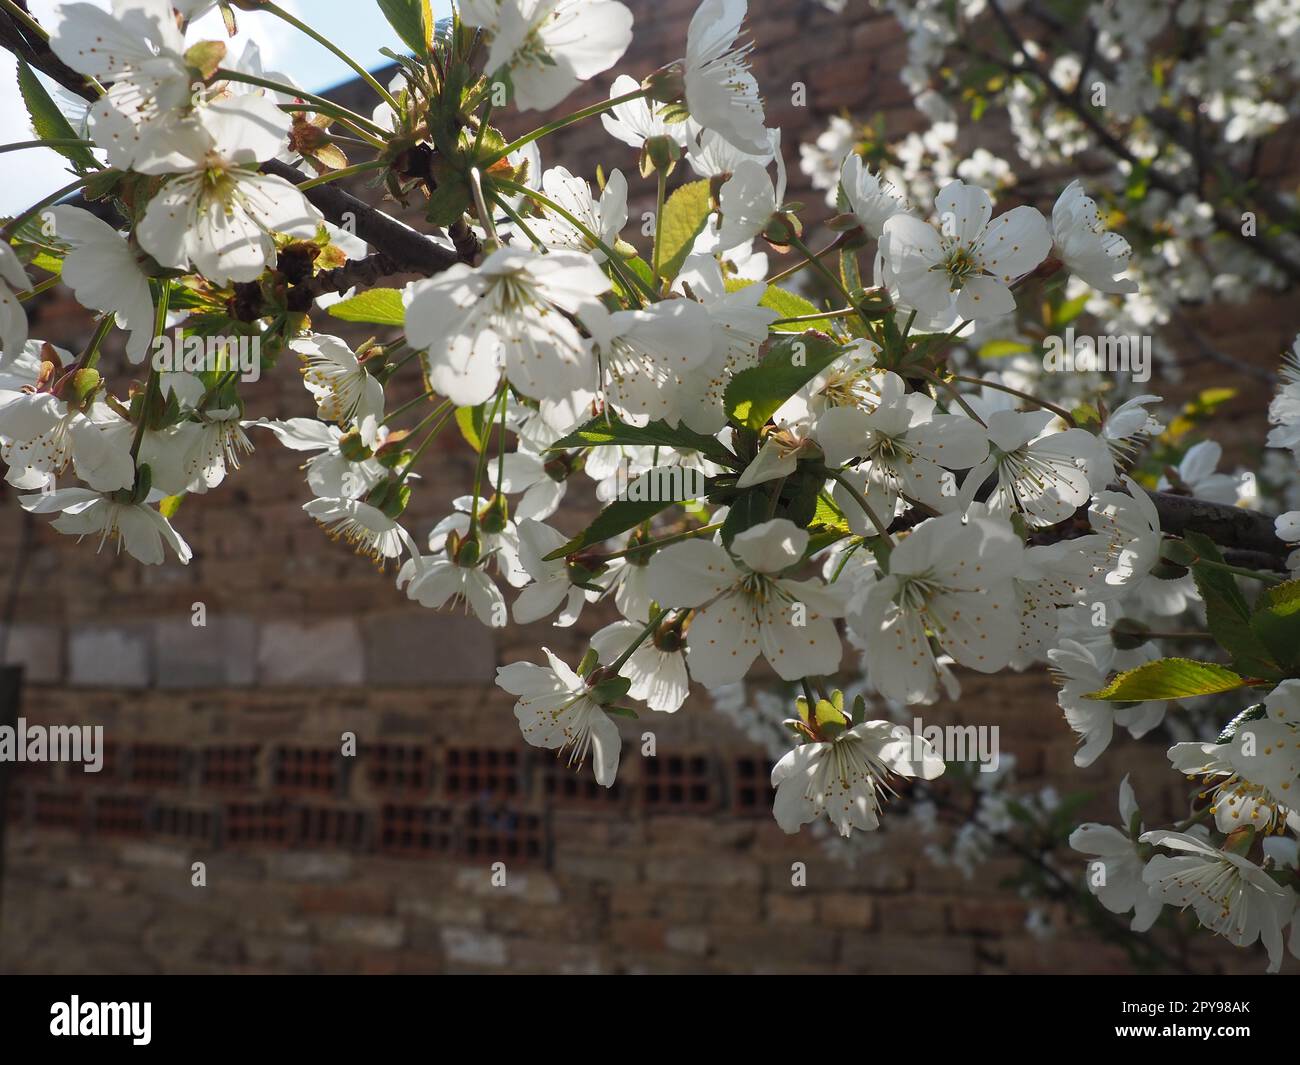 A tree blooming with white flowers. Cherry, apple, plum or sweet cherry in a flowering state. Delicate white petals. A very beautiful blooming spring garden. Stock Photo